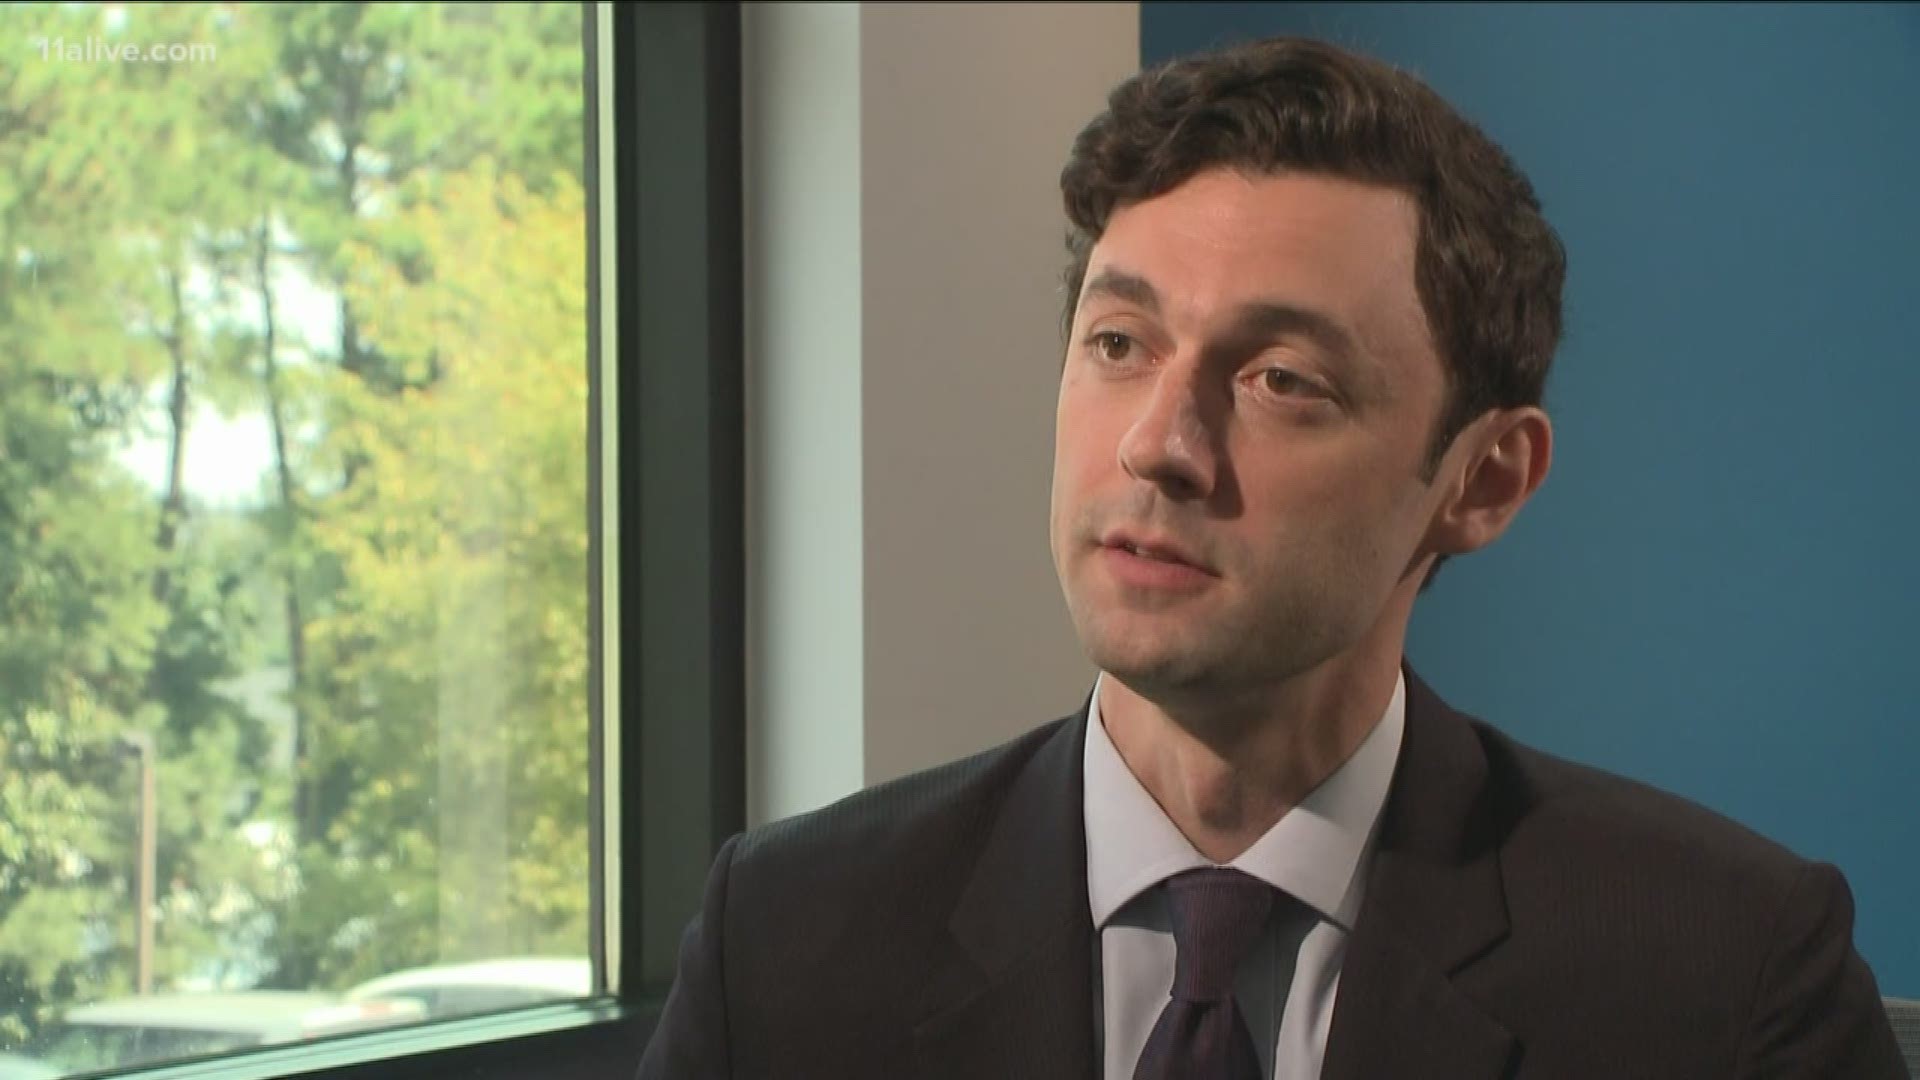 Ossoff says he'll run to advance health care and environmental issues, among others, and to unseat an "ineffective" incumbent who has advanced the agenda of an "obscene" Donald Trump presidency.